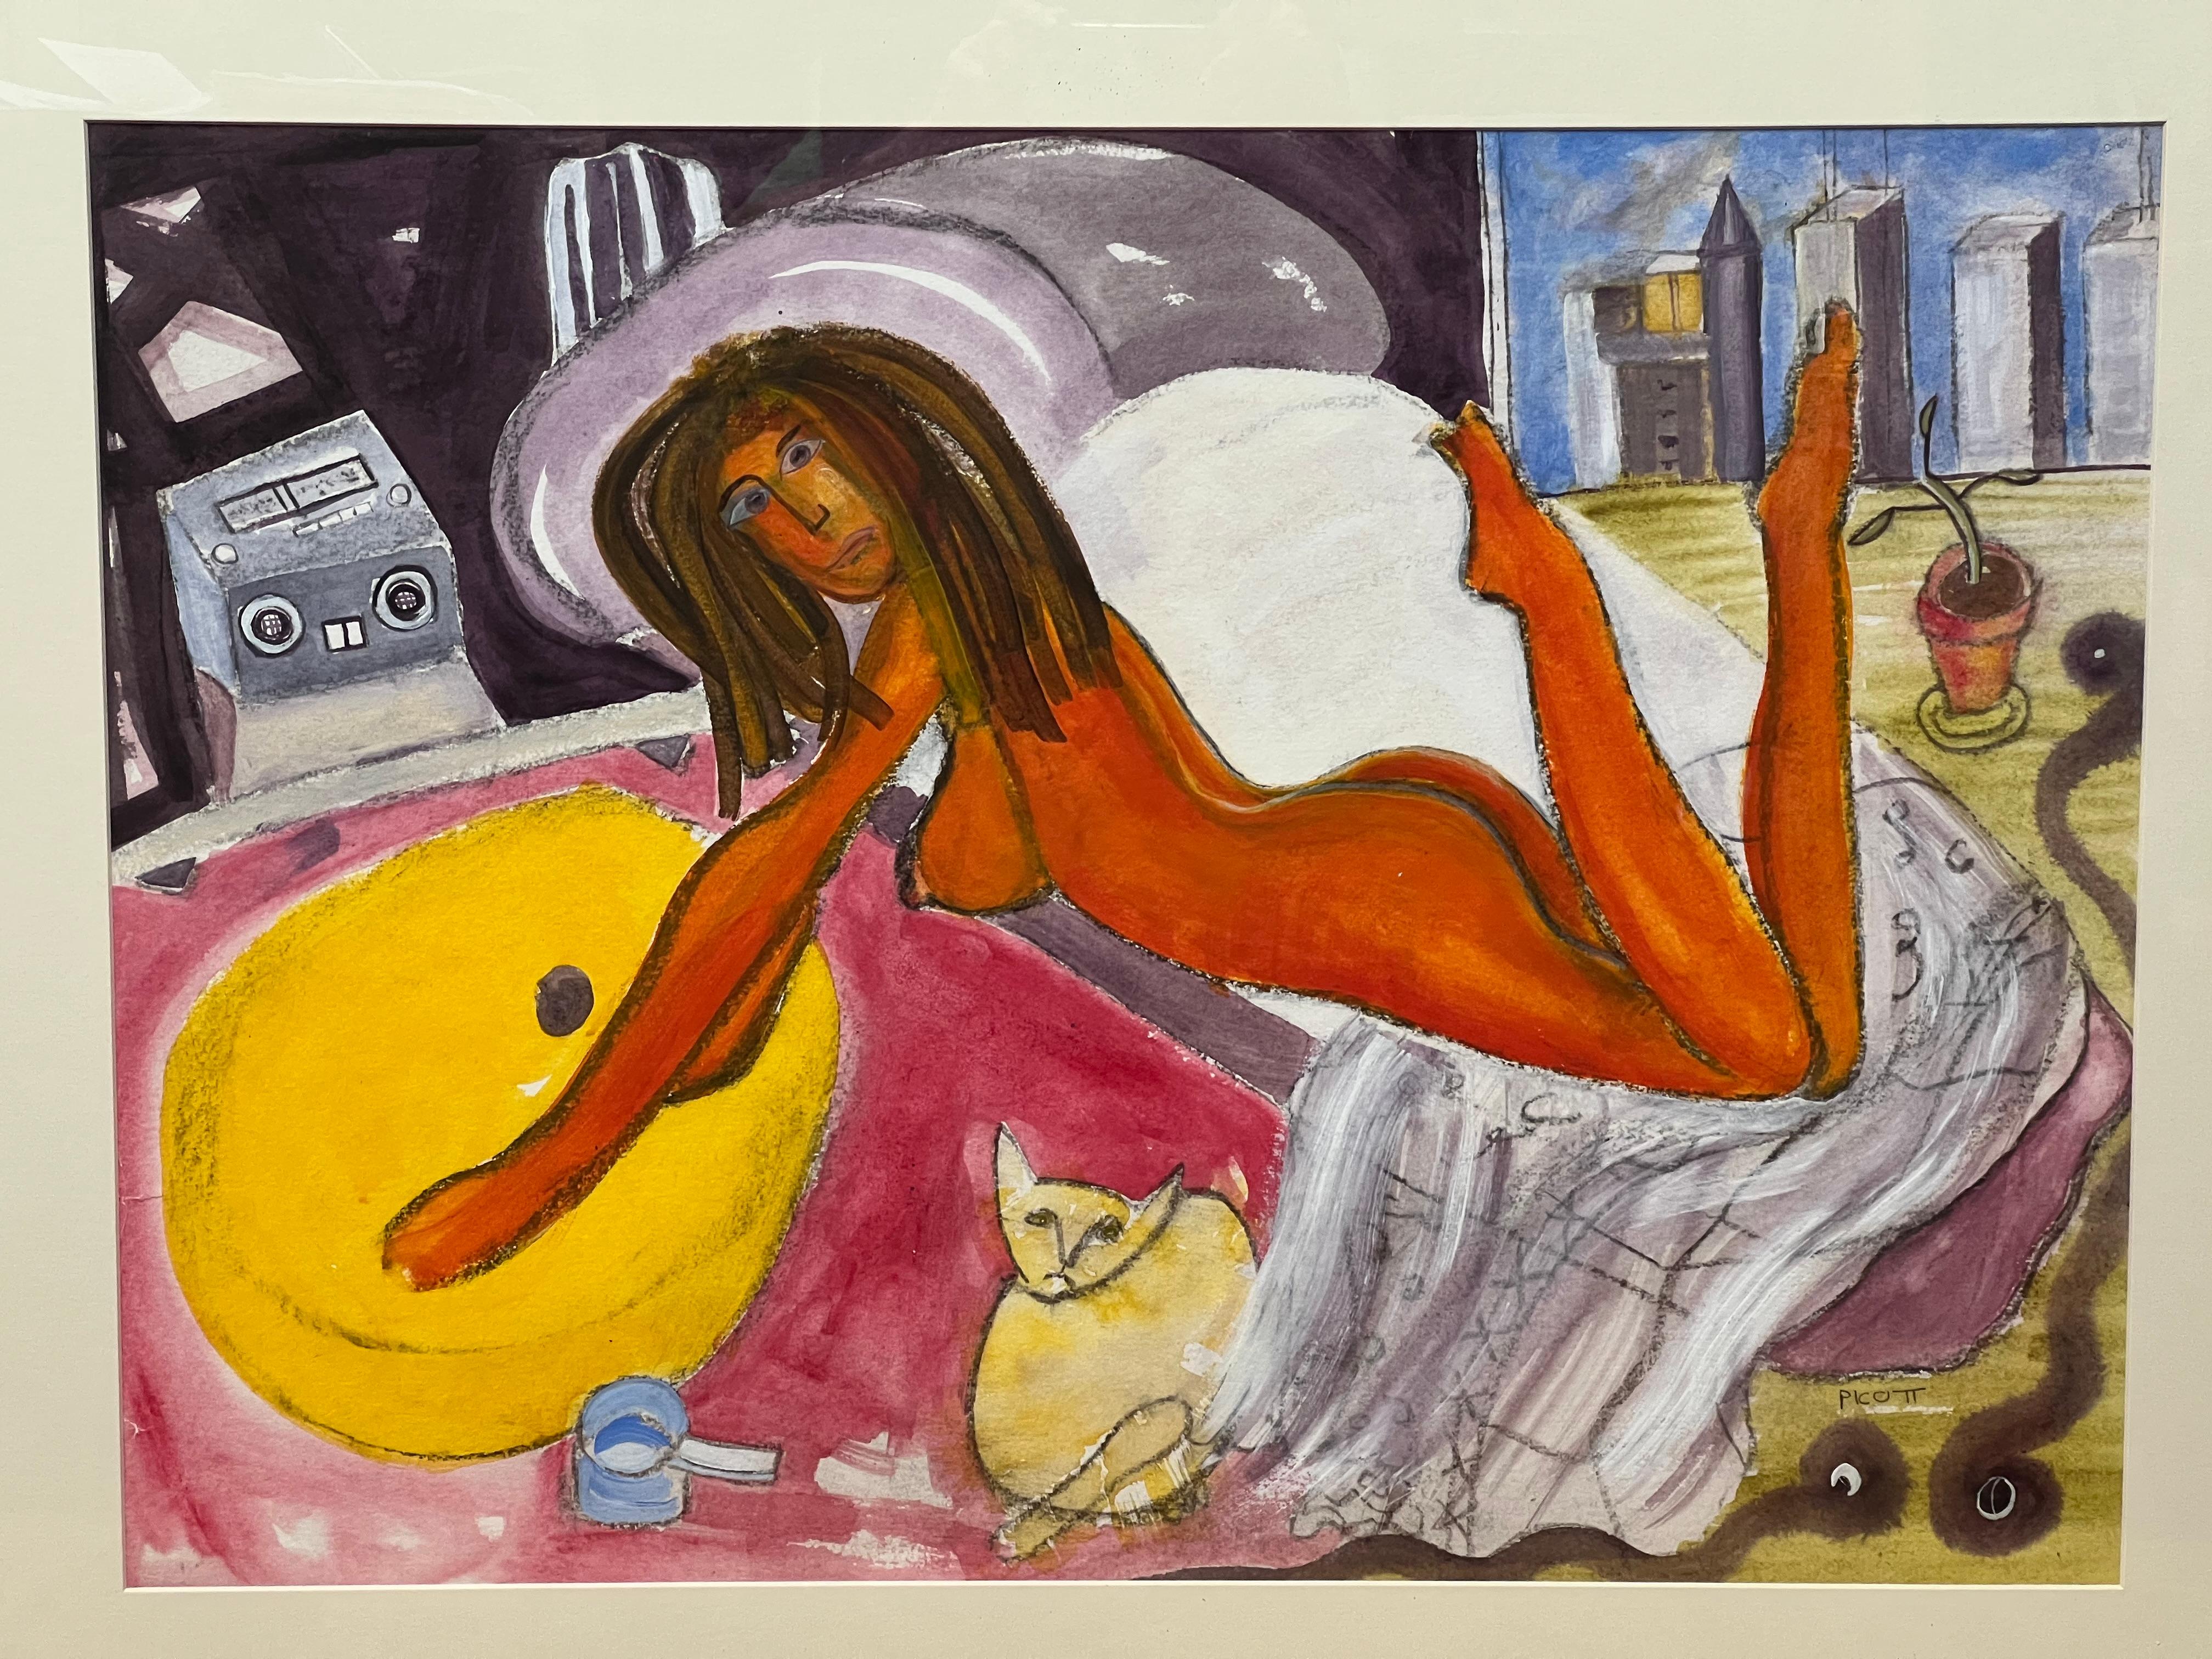 The work is a lively portrayal of an African nude woman in her bedroom. Under the bed, a discontent cat harbors grudges against its owner robbing its yellow cushion. The painting is signed and titled. This is early work since his paintings became